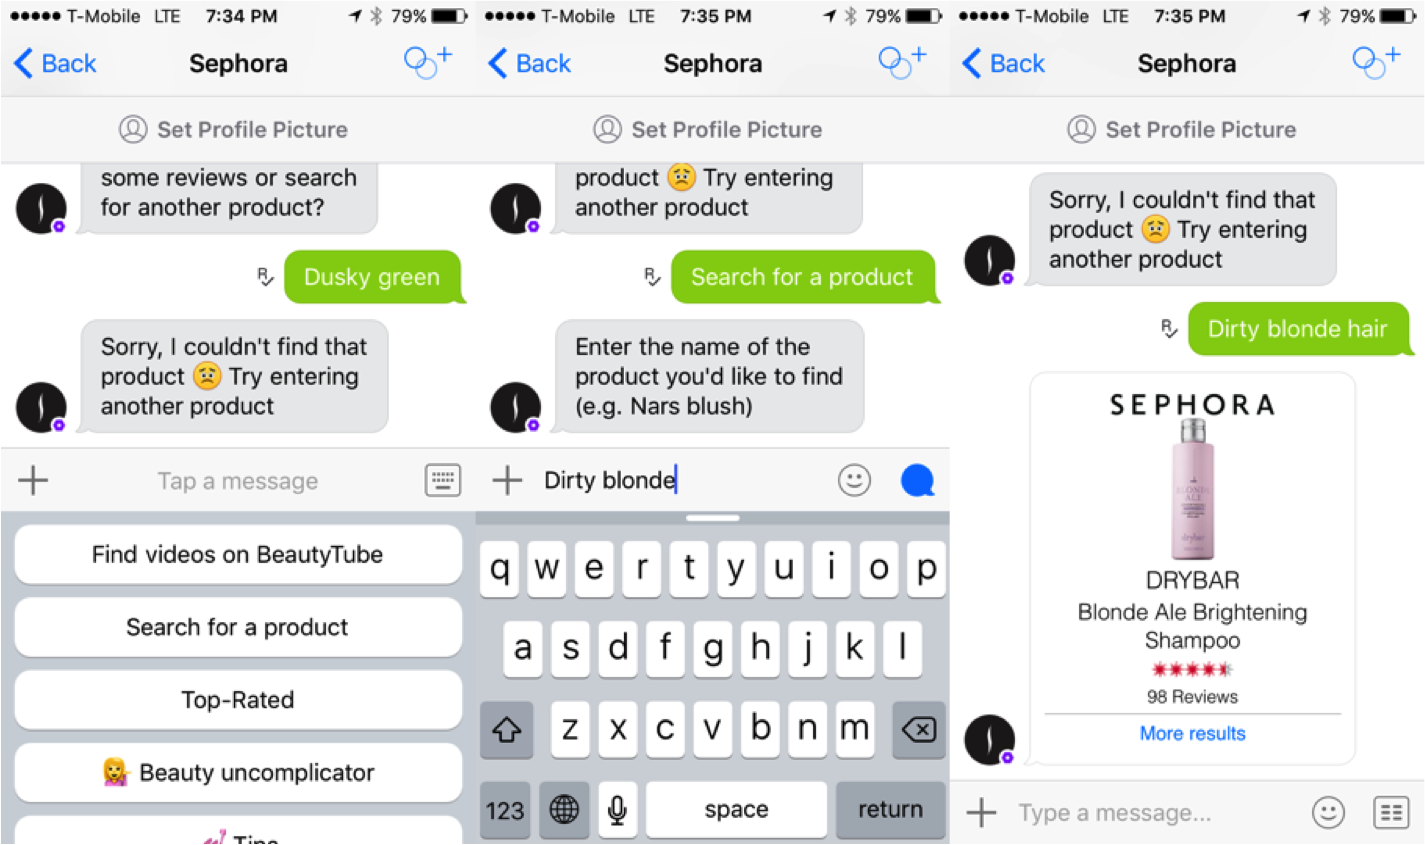 Sephora Chatbot On Facebook Messenger To Aid In Search, Discovery | DeviceDaily.com